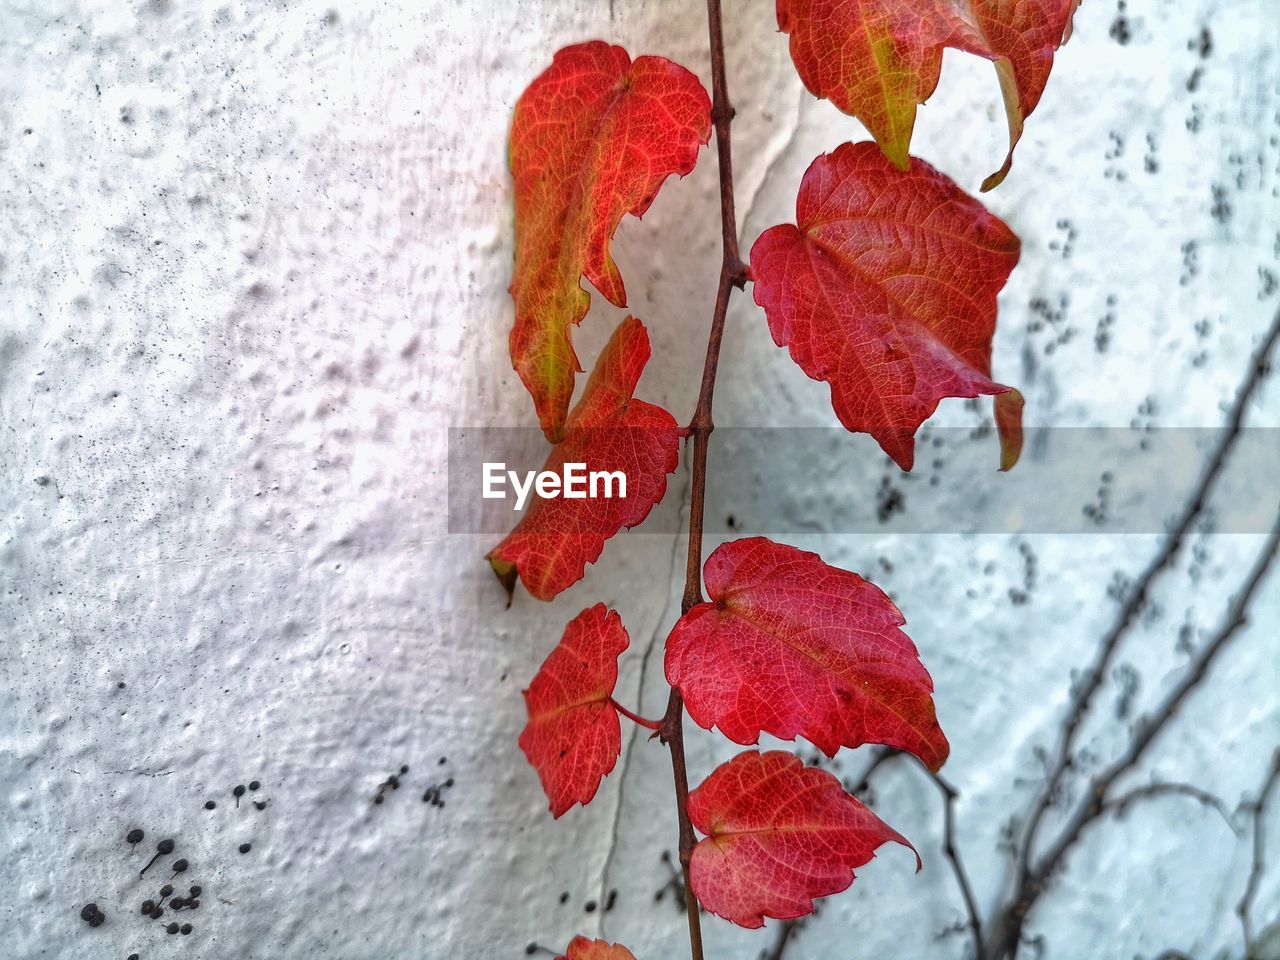 red, leaf, plant part, plant, close-up, nature, no people, autumn, day, petal, beauty in nature, wall - building feature, snow, outdoors, branch, tree, flower, macro photography, focus on foreground, winter, maple leaf, fragility, dry, textured, cold temperature